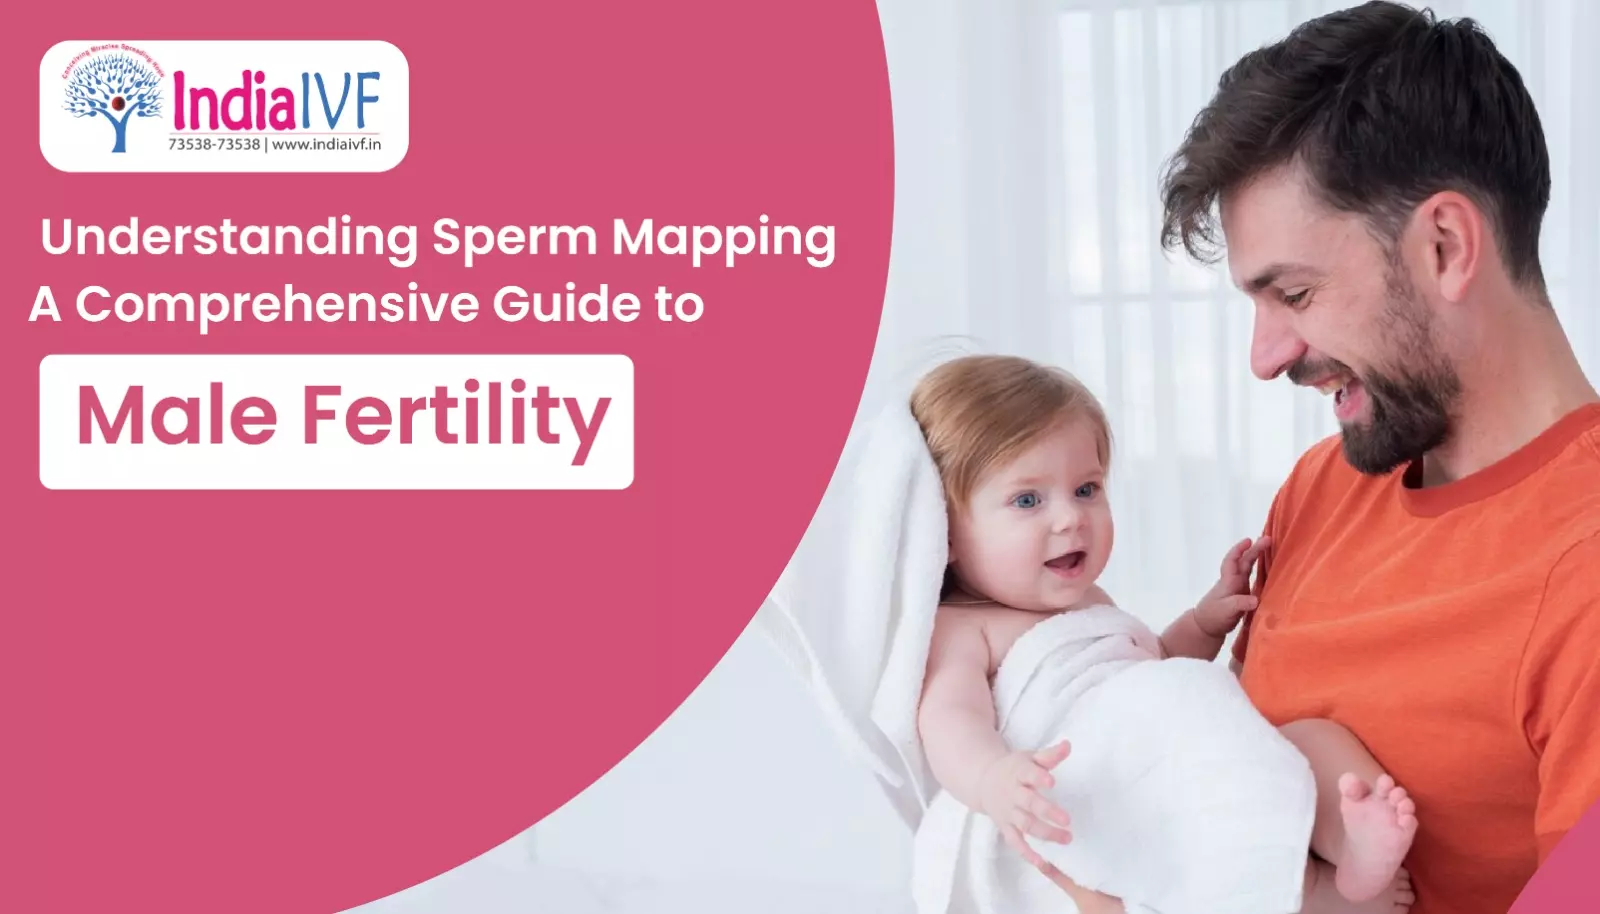 Sperm Mapping